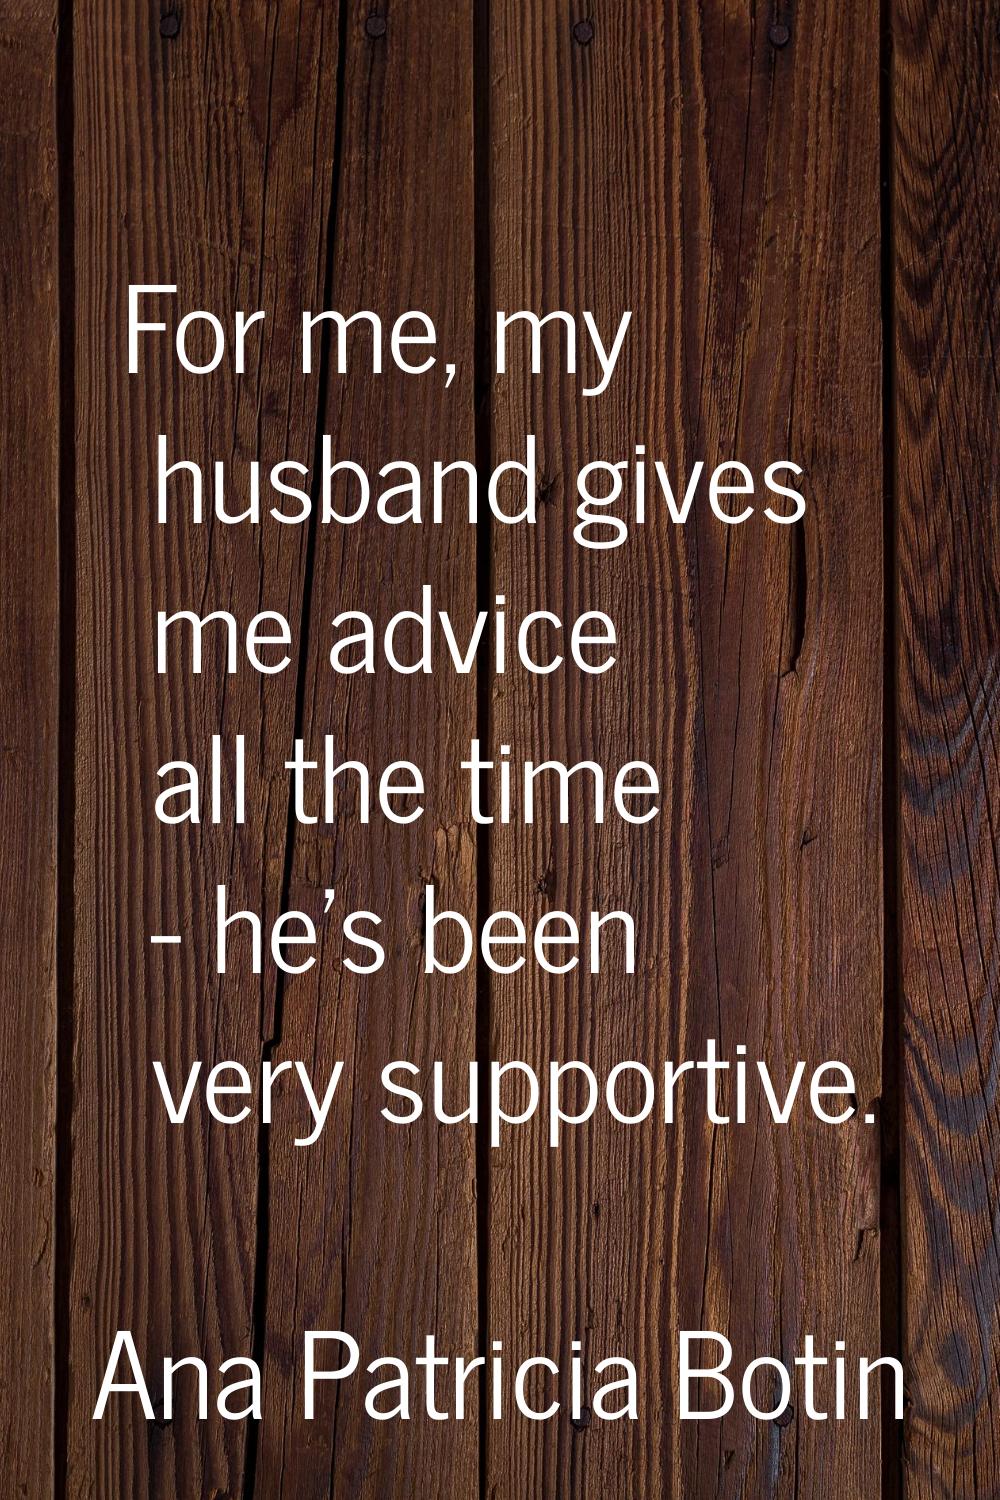 For me, my husband gives me advice all the time - he's been very supportive.